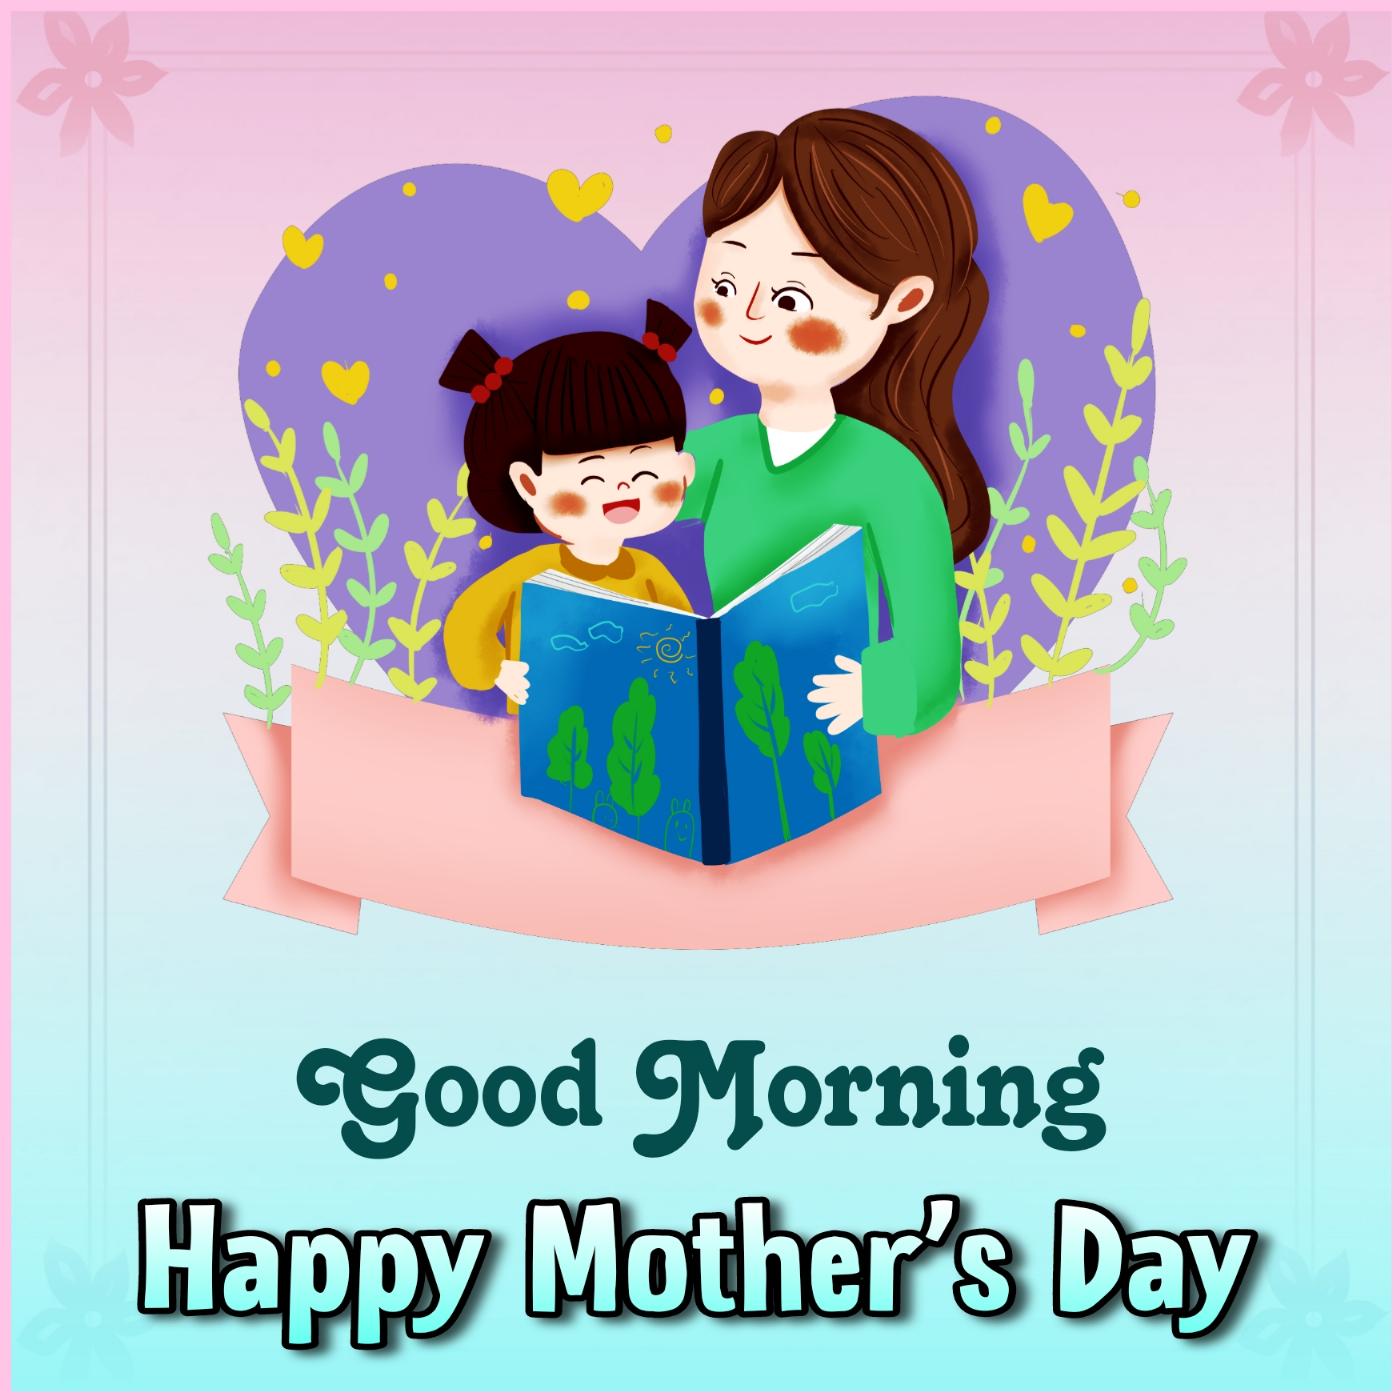 Good Morning Happy Mother's Day Images